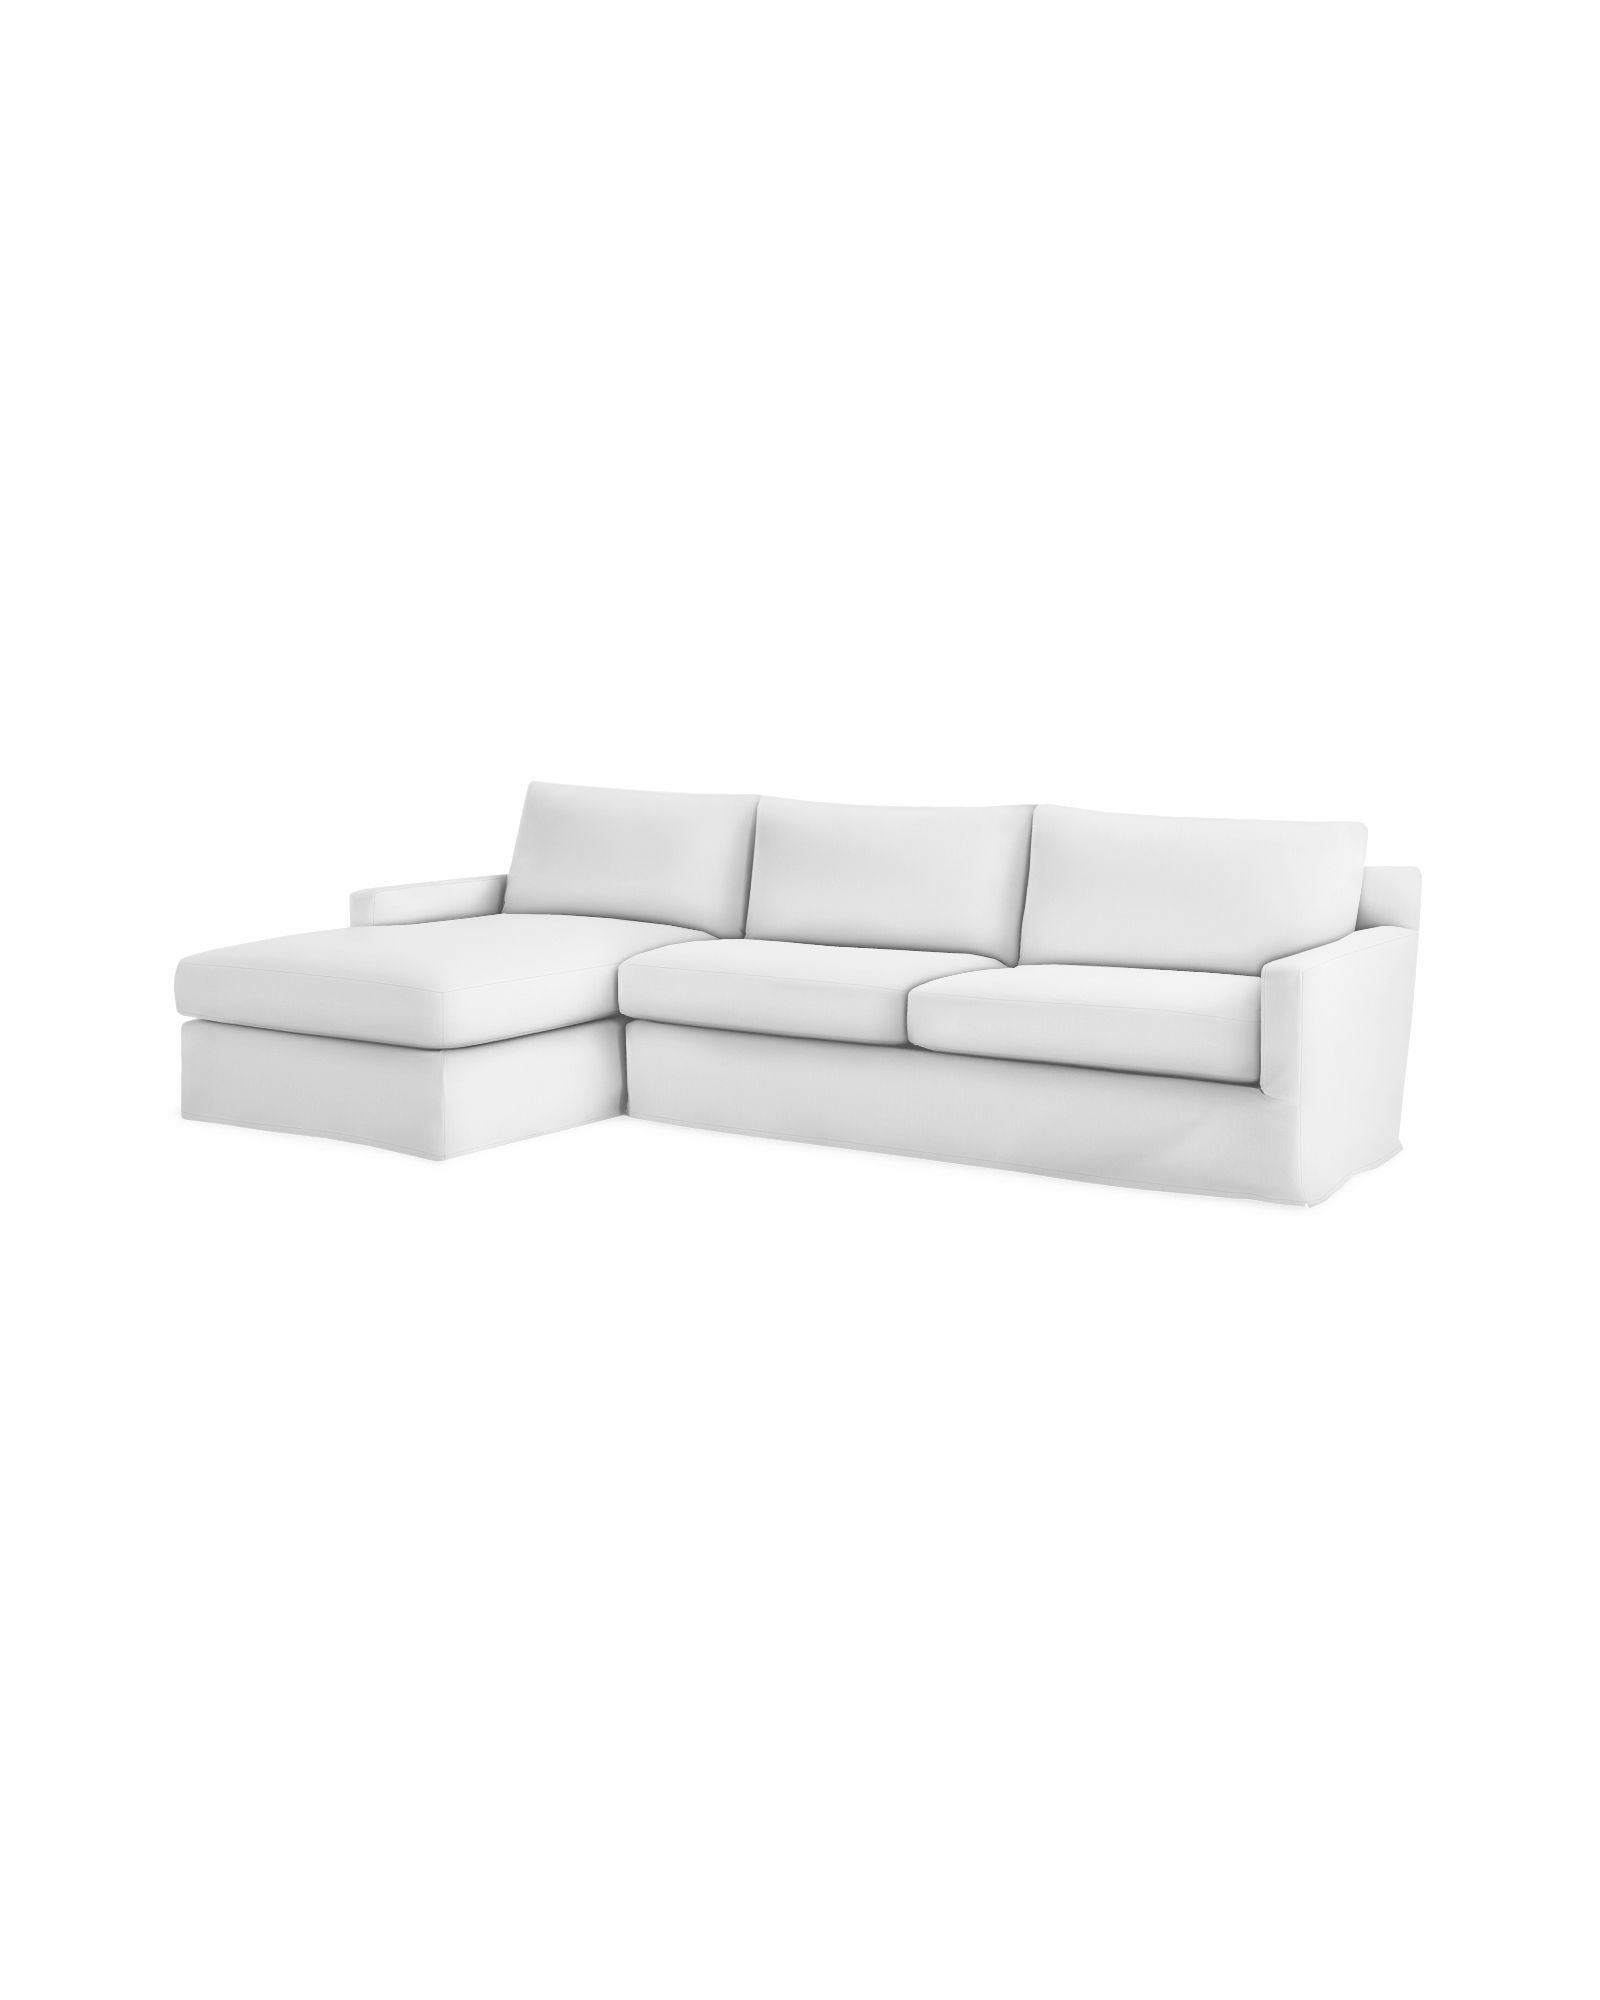 Summit Slipcovered Chaise Sectional - Left-Facing | Serena and Lily